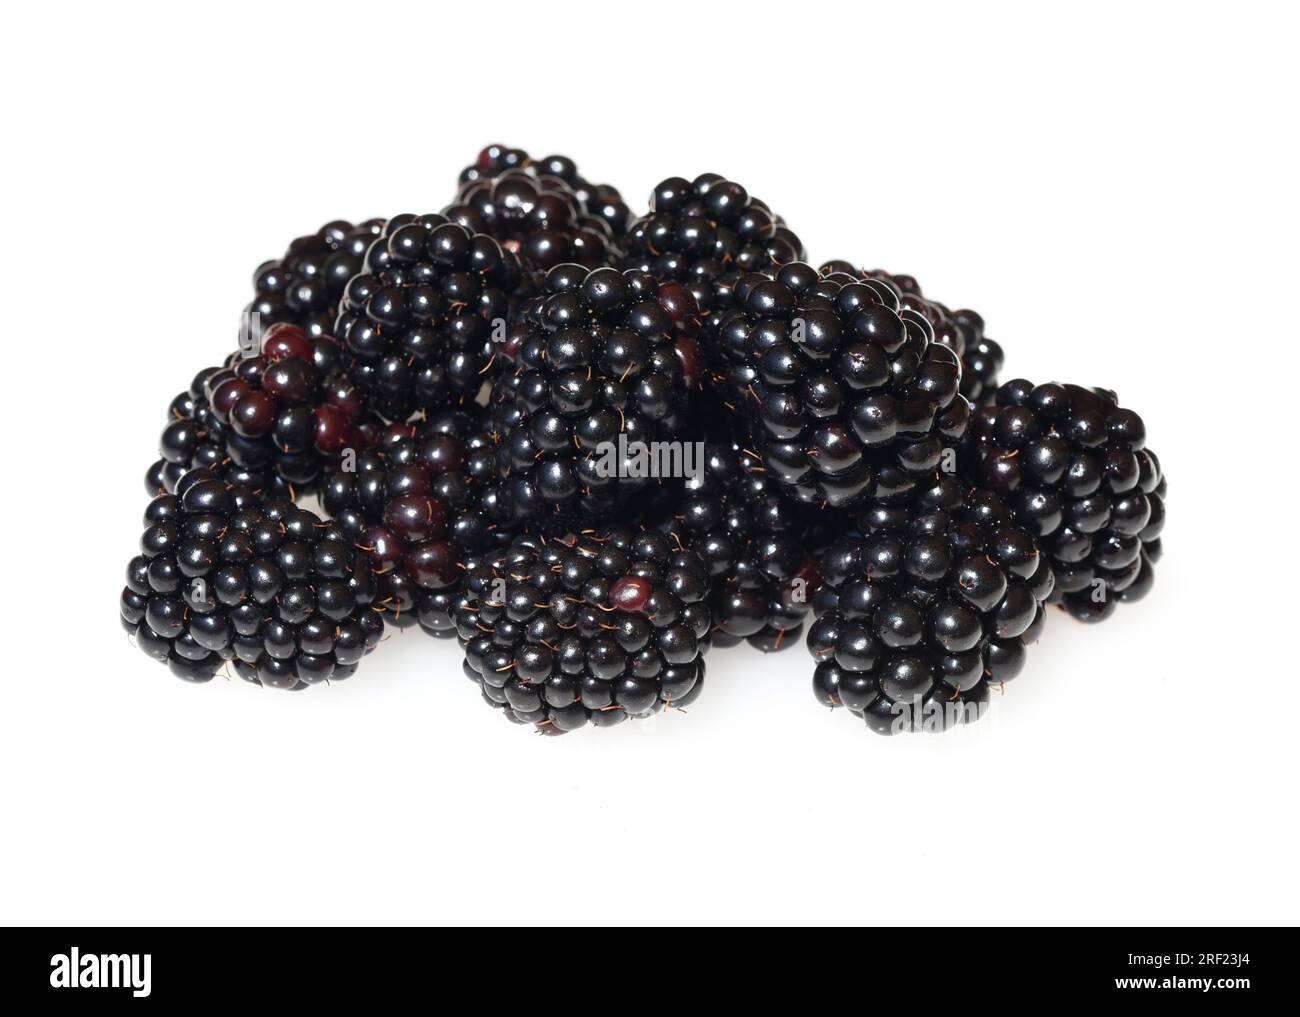 Blackberries, Rubus fructicosa, is a tasty berry plant with black berries Stock Photo